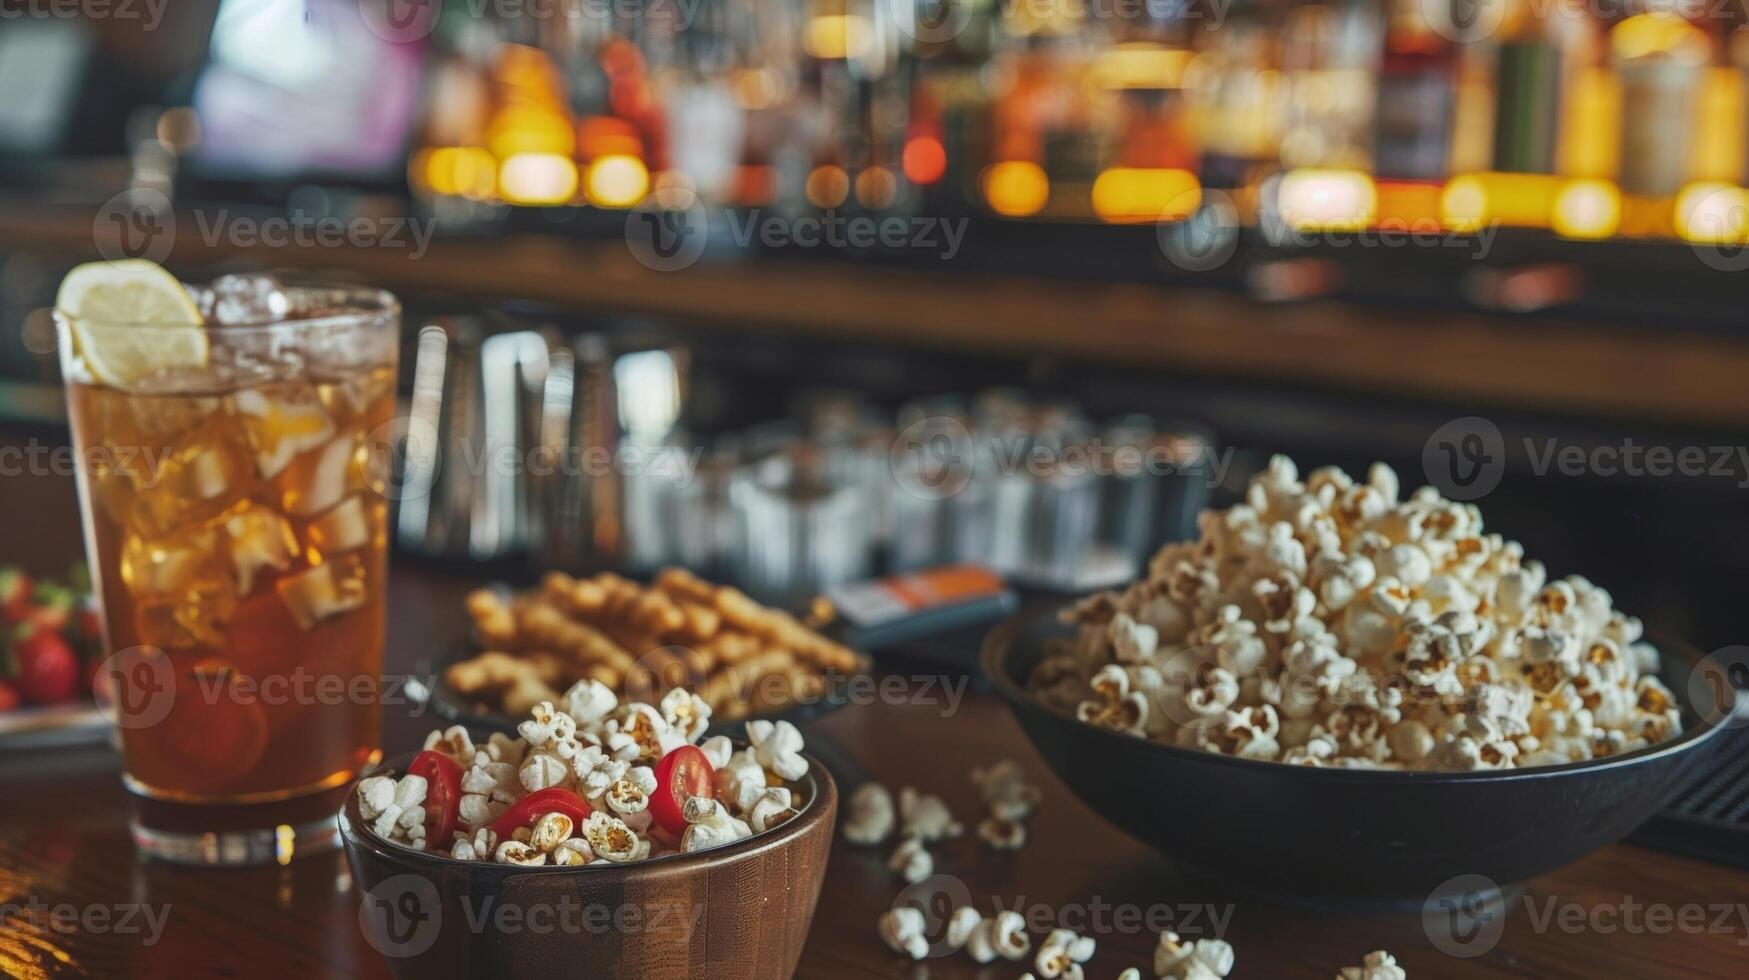 The bar offers a variety of bar snacks and appetizers including gourmet popcorn and charerie boards to complement the drinks photo